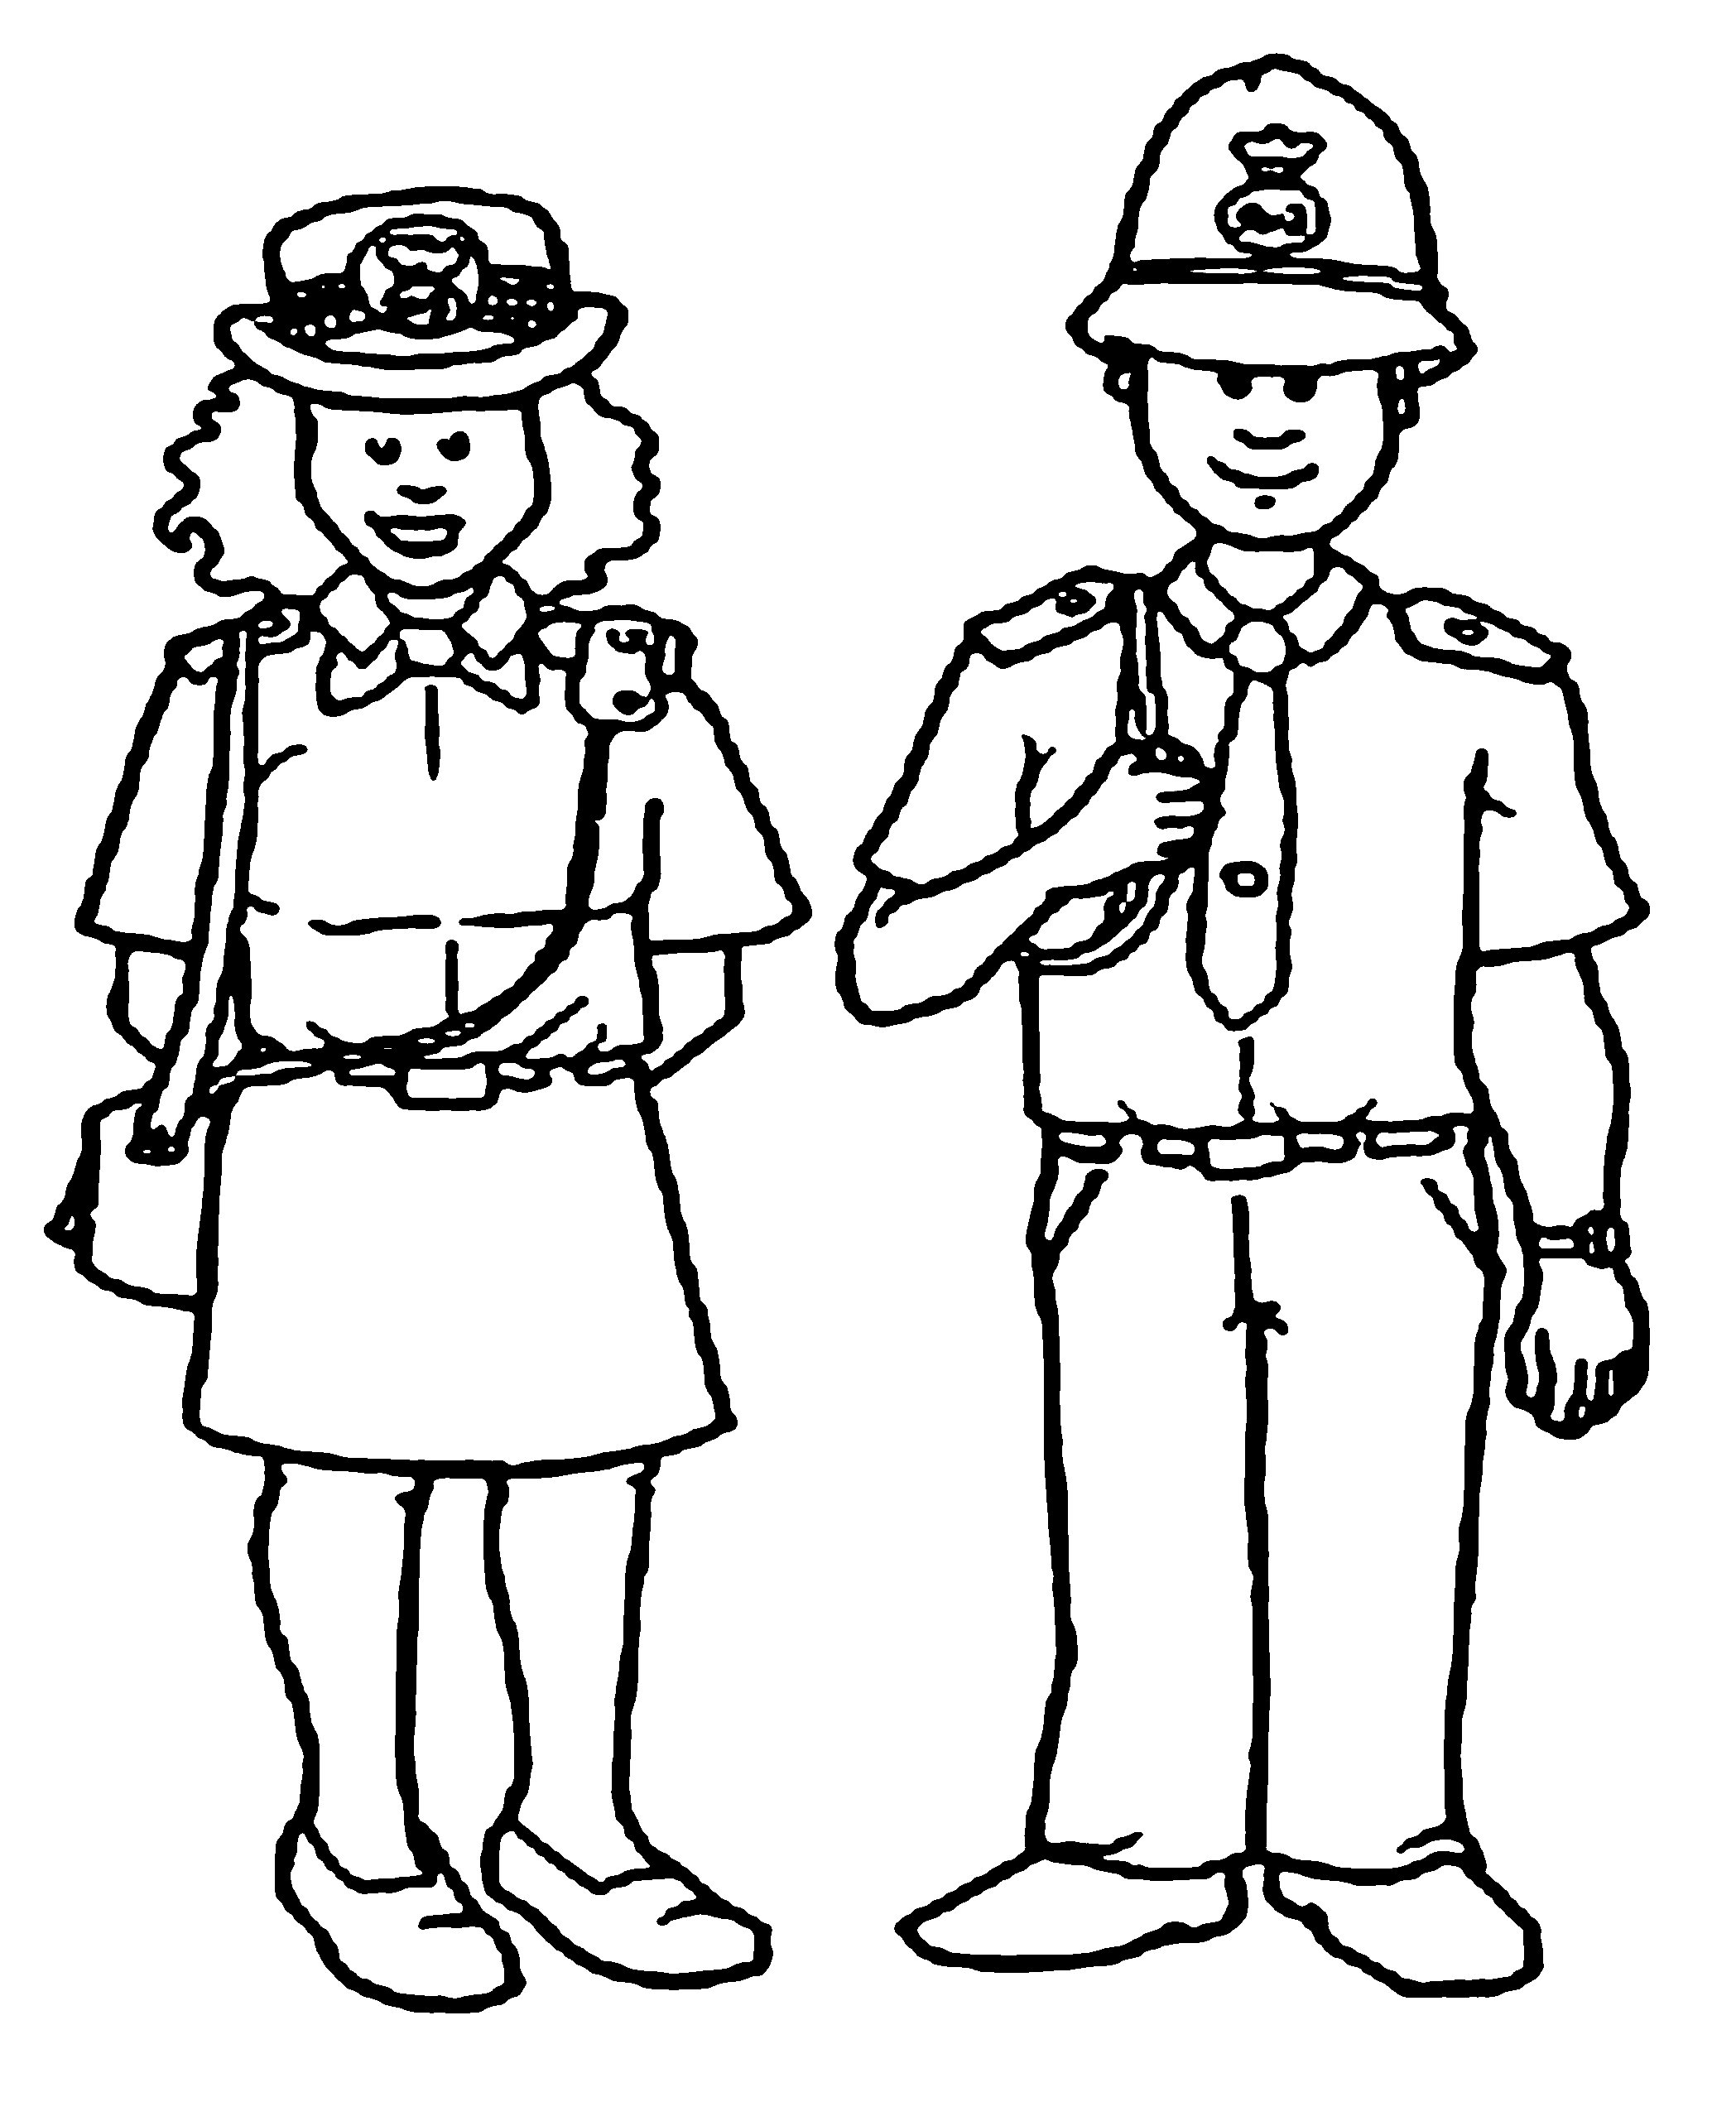 Police Station Coloring Pages at Free printable